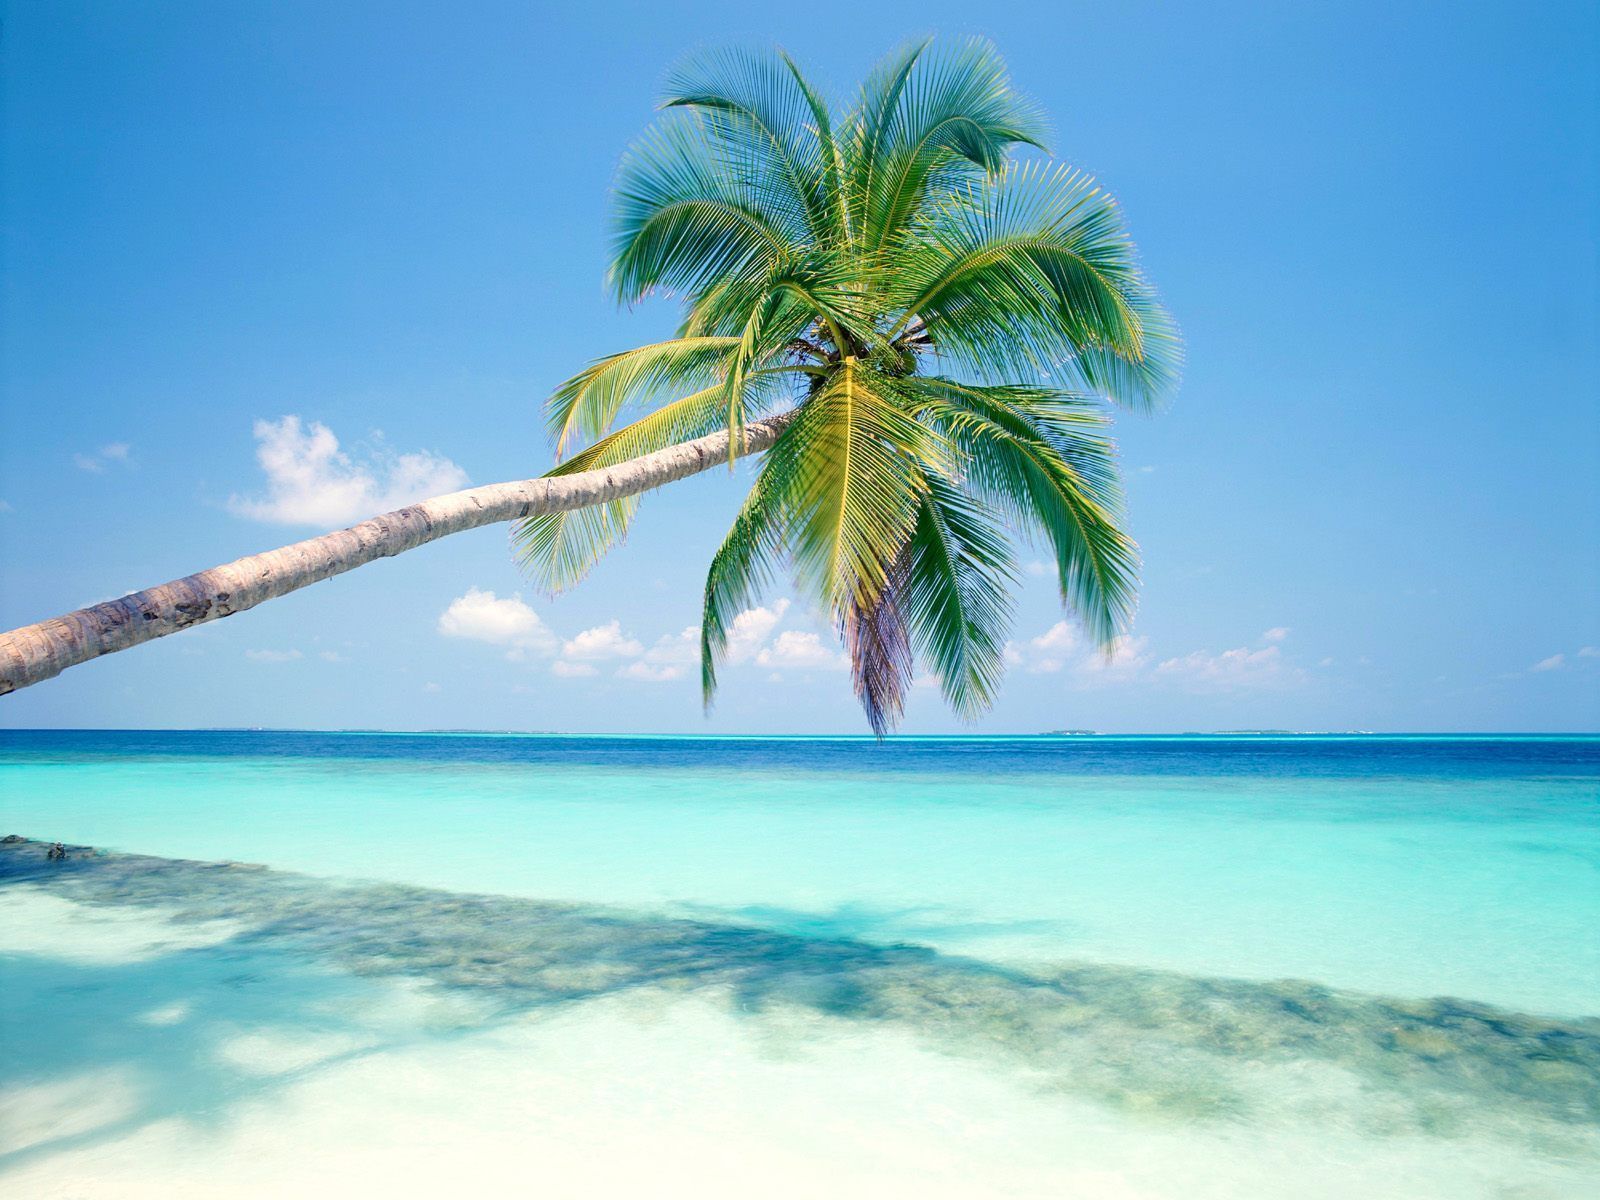 Tropical Island Wallpapers | HD Wallpapers